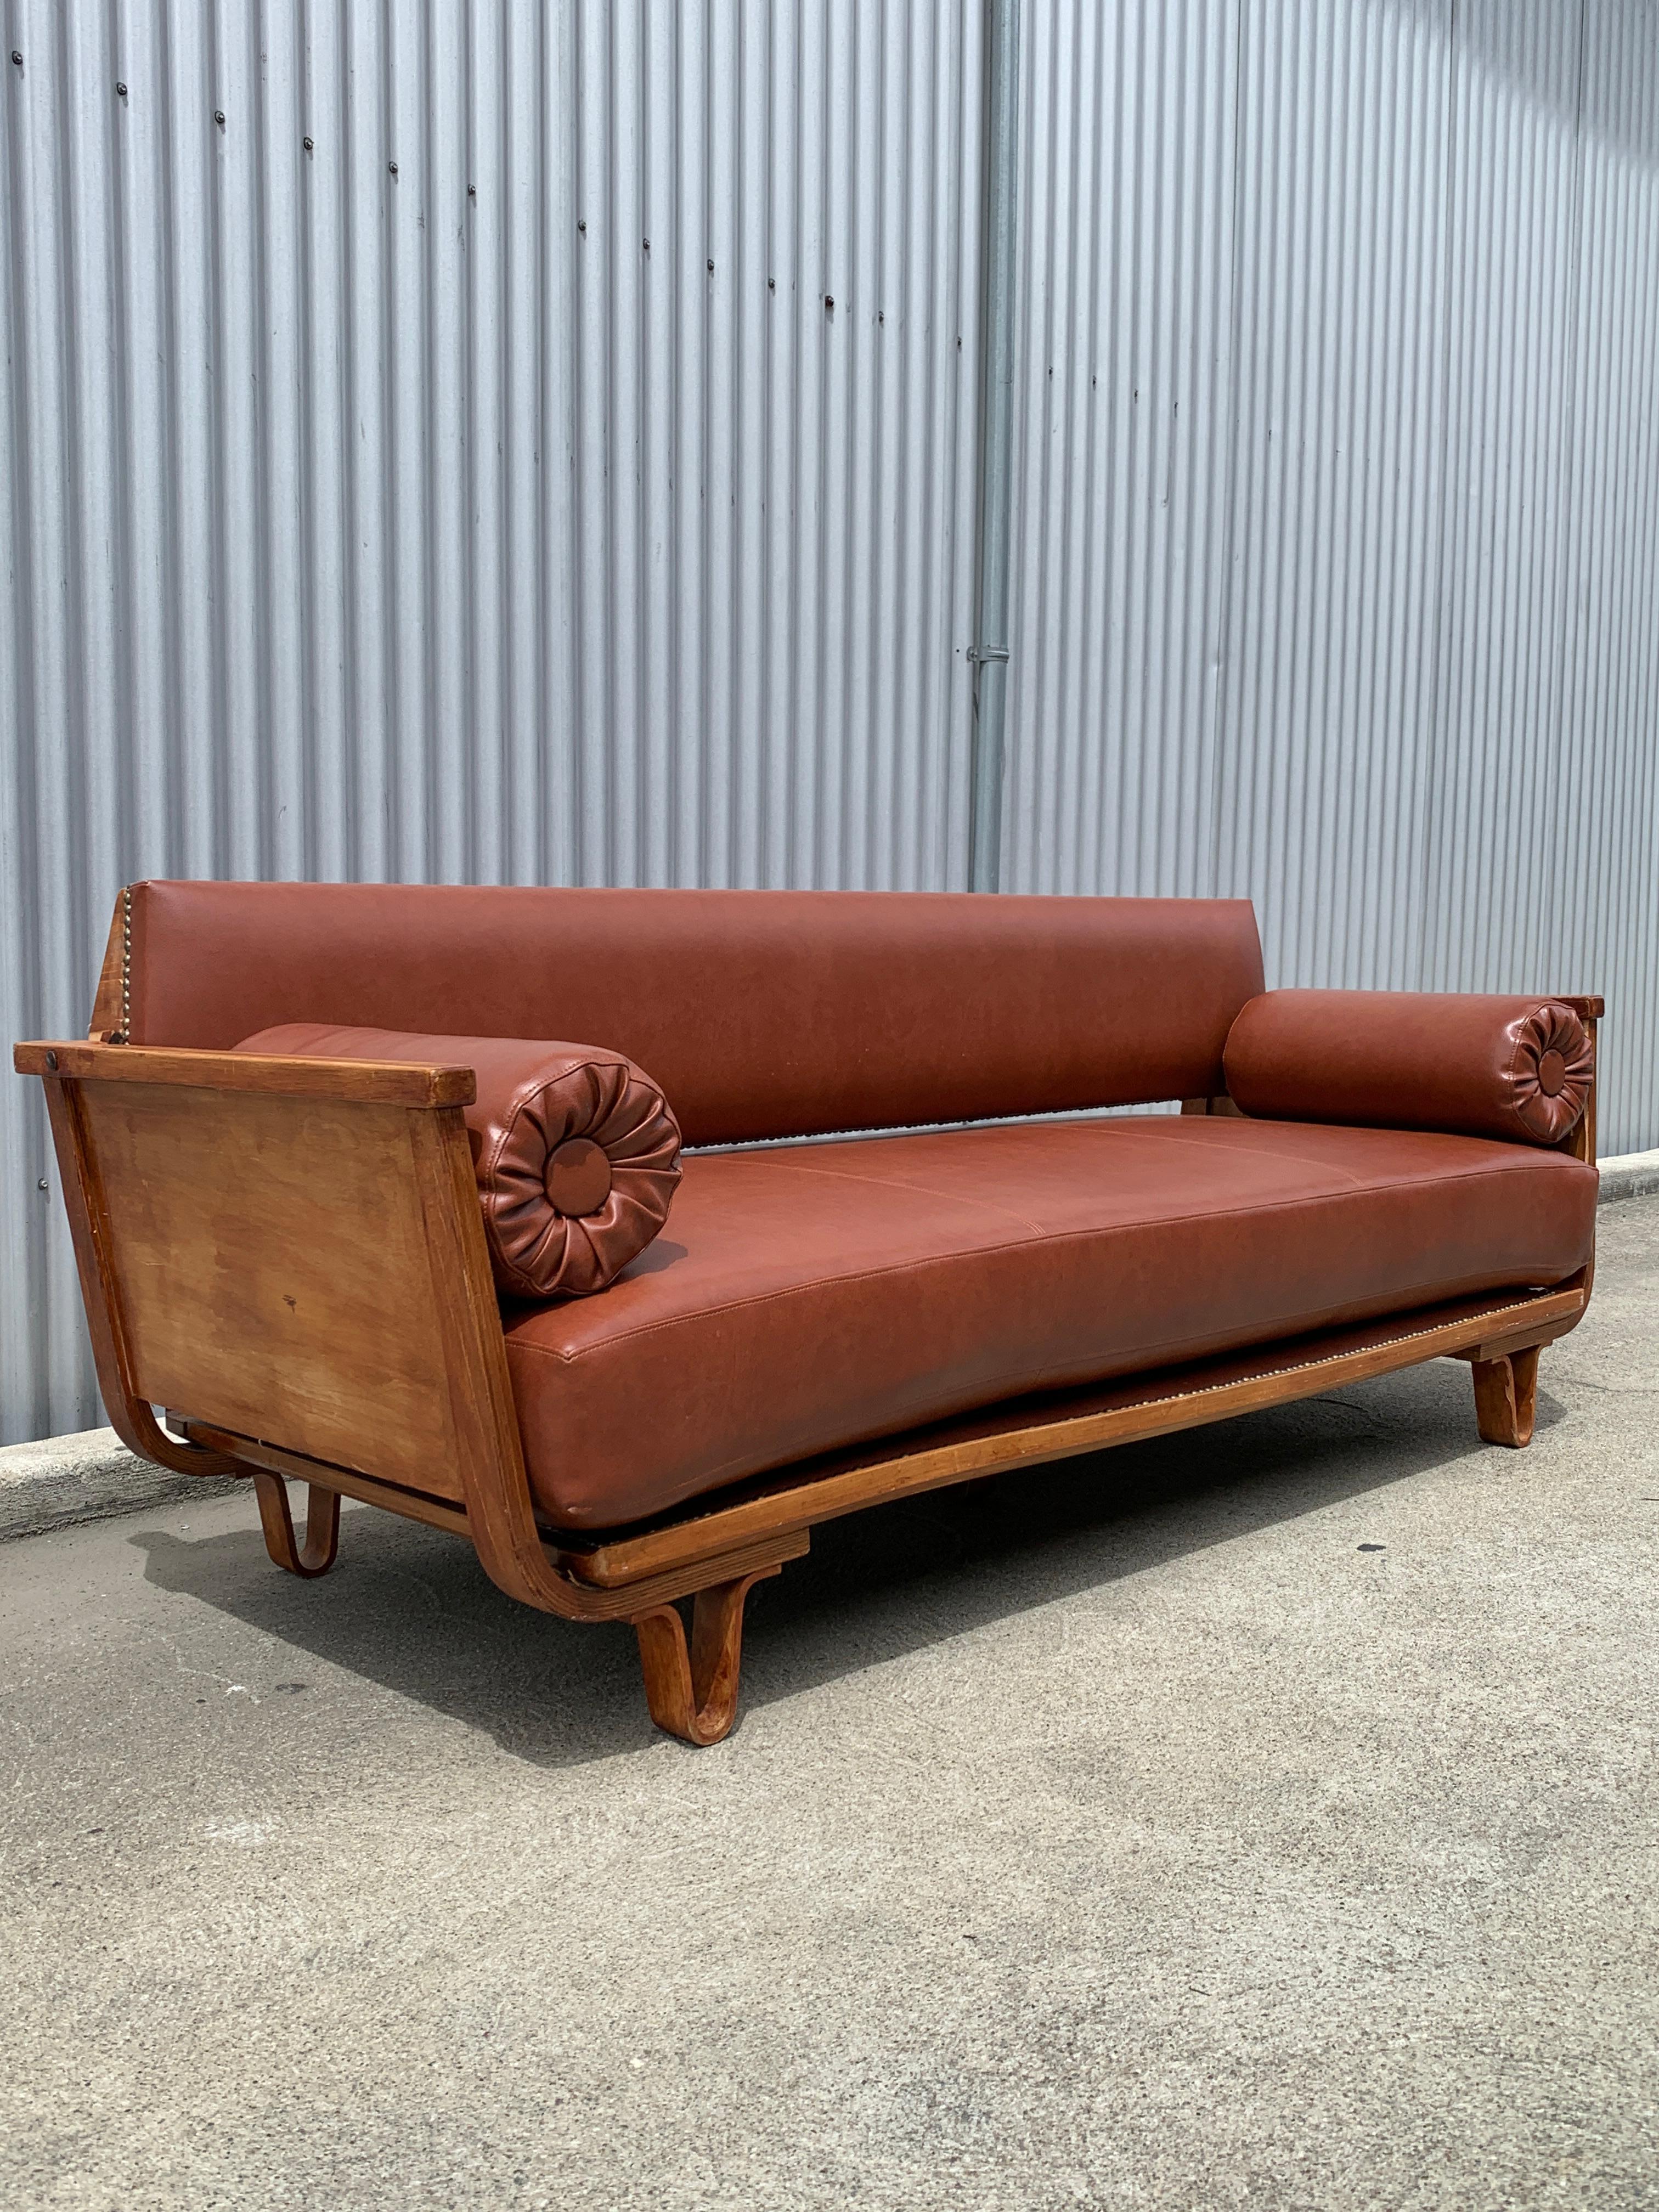 Cees Braakman for Pastoe, Daybed MB01, in a curved birch plywood and red leather. This piece is offered in as-is condition with a more victorian feel; a darker stain and nailhead trim. No structural damage can be found, and the piece works as